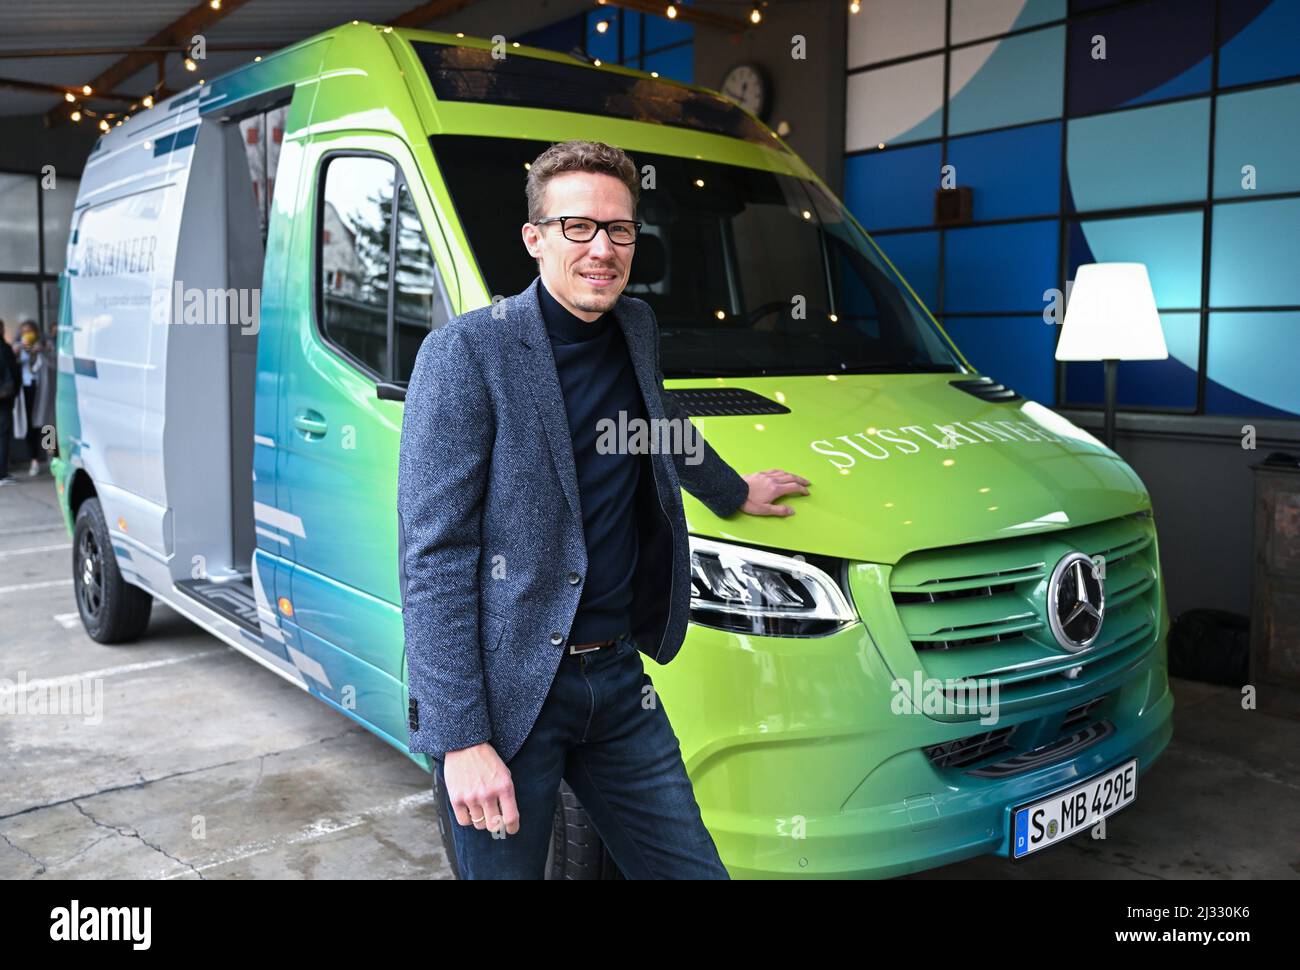 Sprinter Vans High Resolution Stock Photography and Images - Alamy